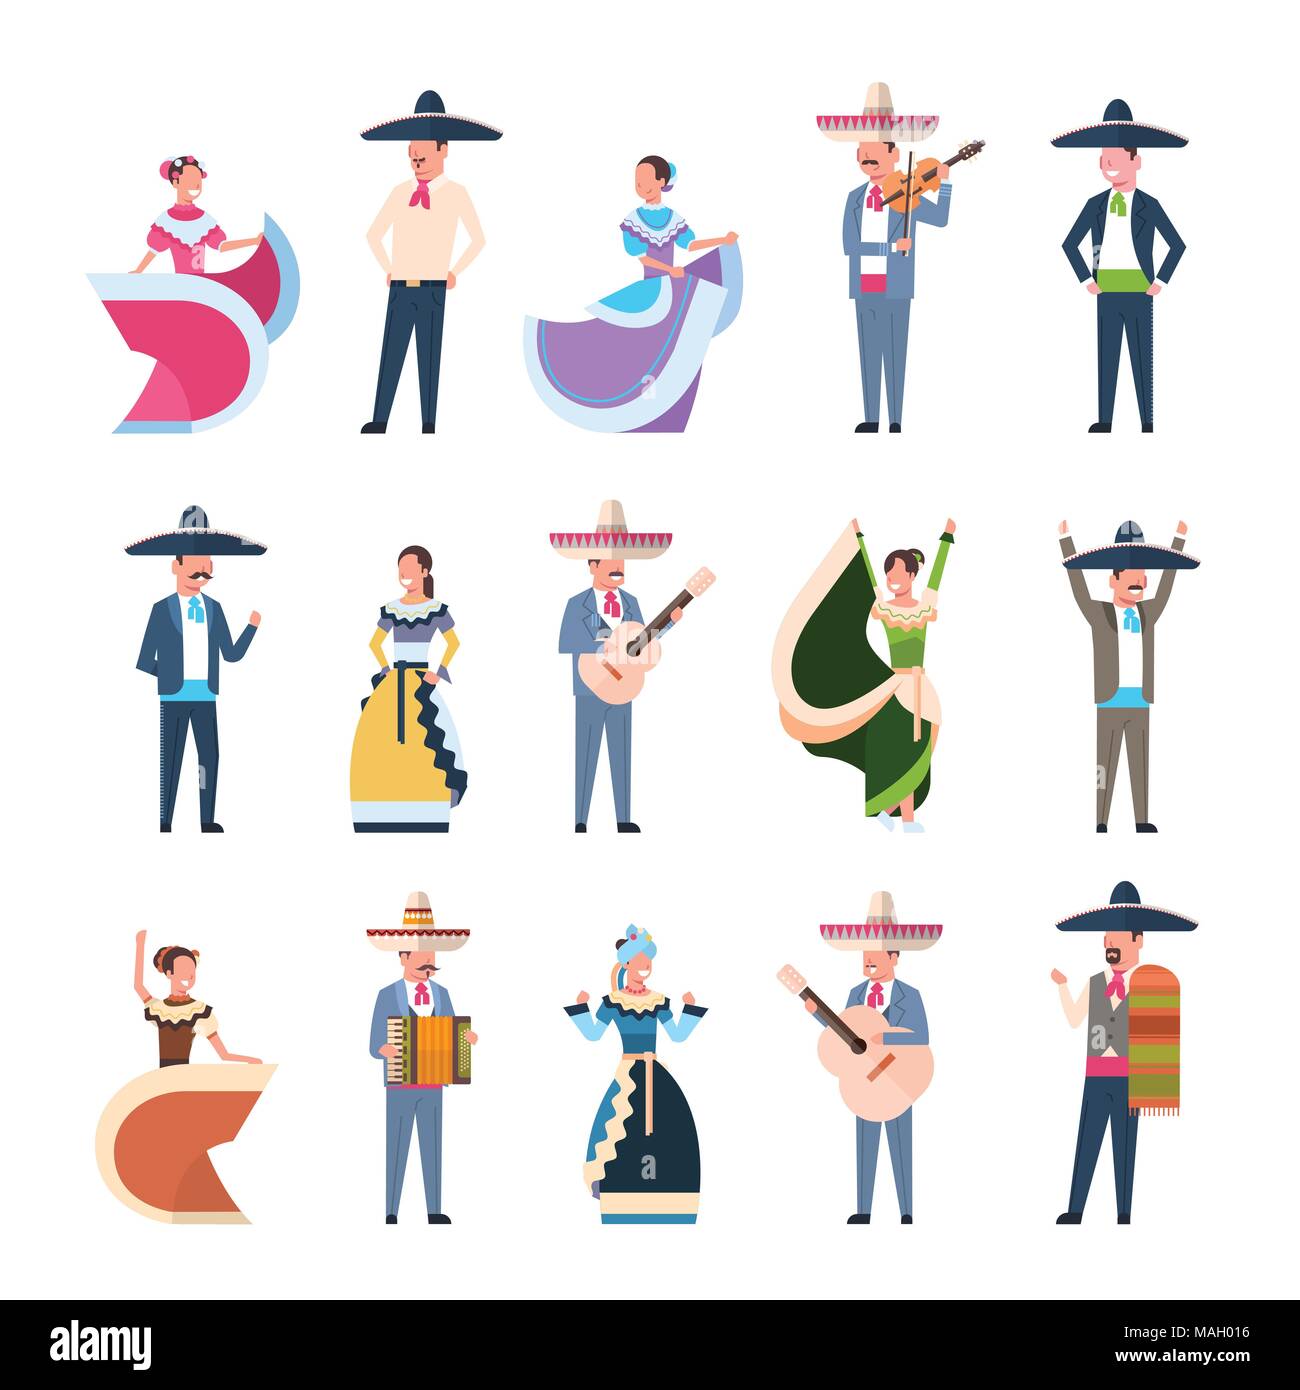 Set Of Mexican People In Traditional Costumes Dancers And Musicians Isolated On White Background Stock Vector